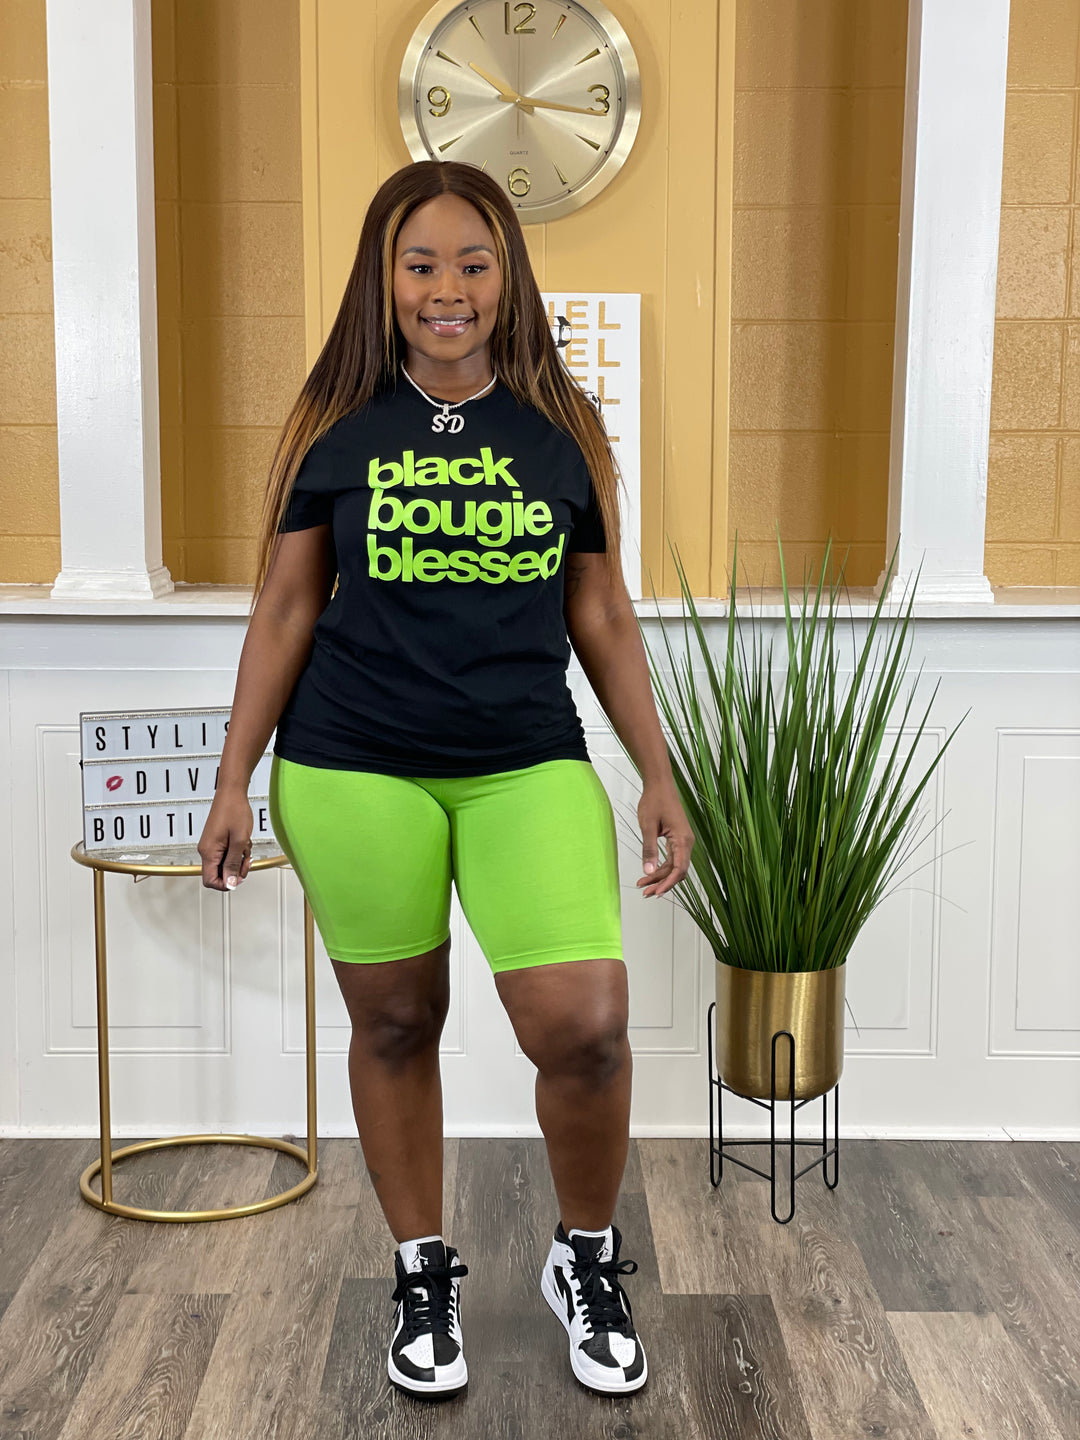 Luxe Cotton Biker Shorts up to 3XL (Lime Green)